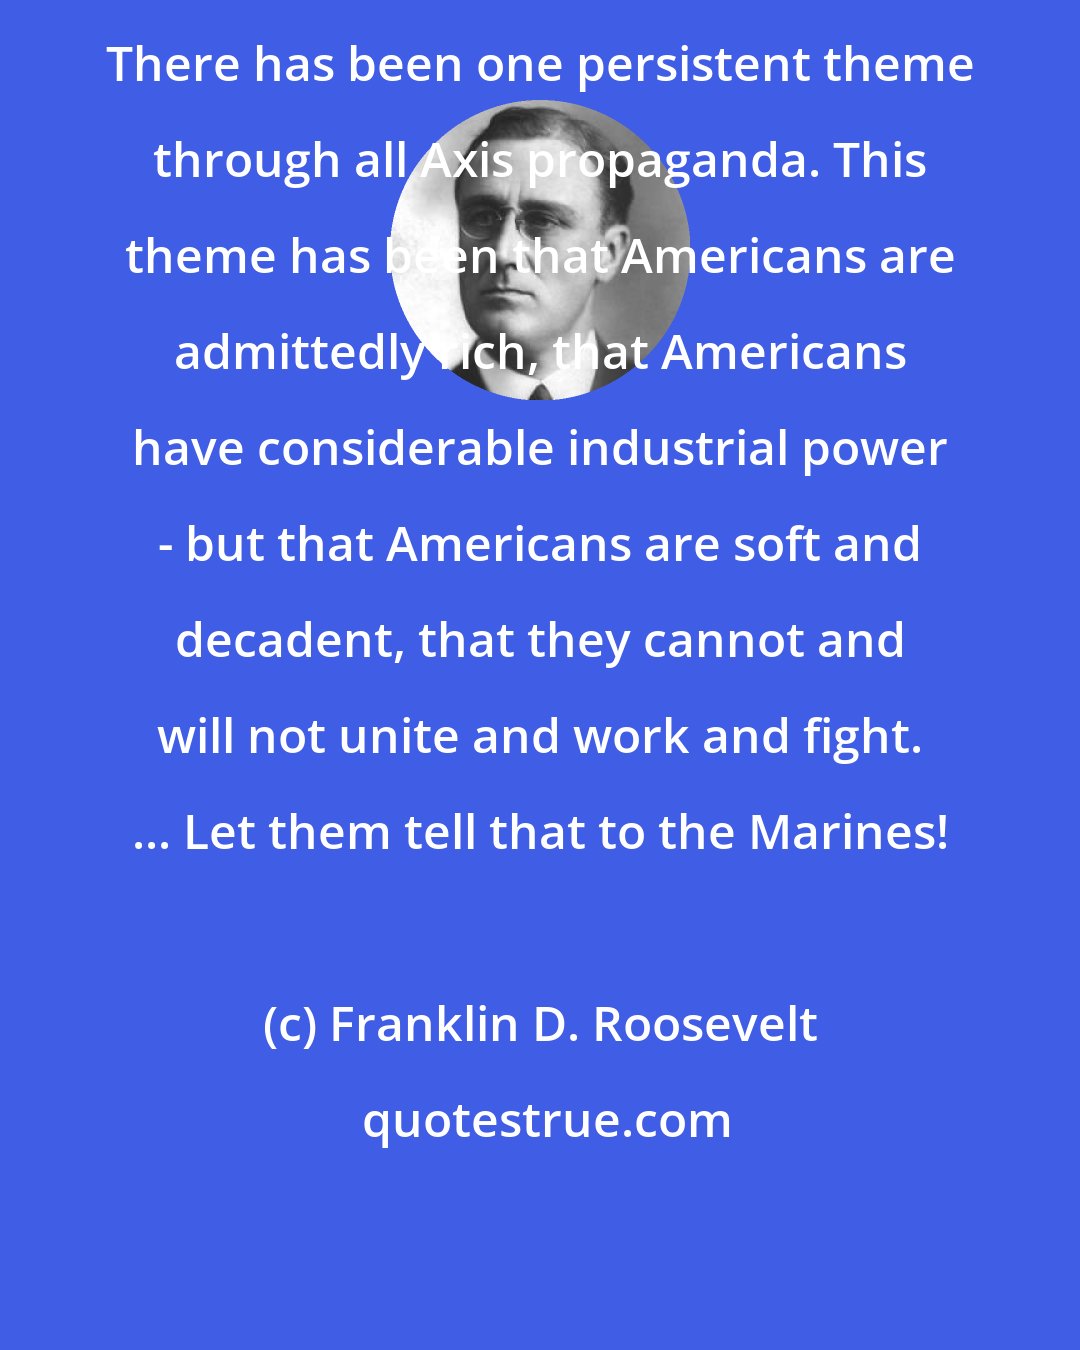 Franklin D. Roosevelt: There has been one persistent theme through all Axis propaganda. This theme has been that Americans are admittedly rich, that Americans have considerable industrial power - but that Americans are soft and decadent, that they cannot and will not unite and work and fight. ... Let them tell that to the Marines!